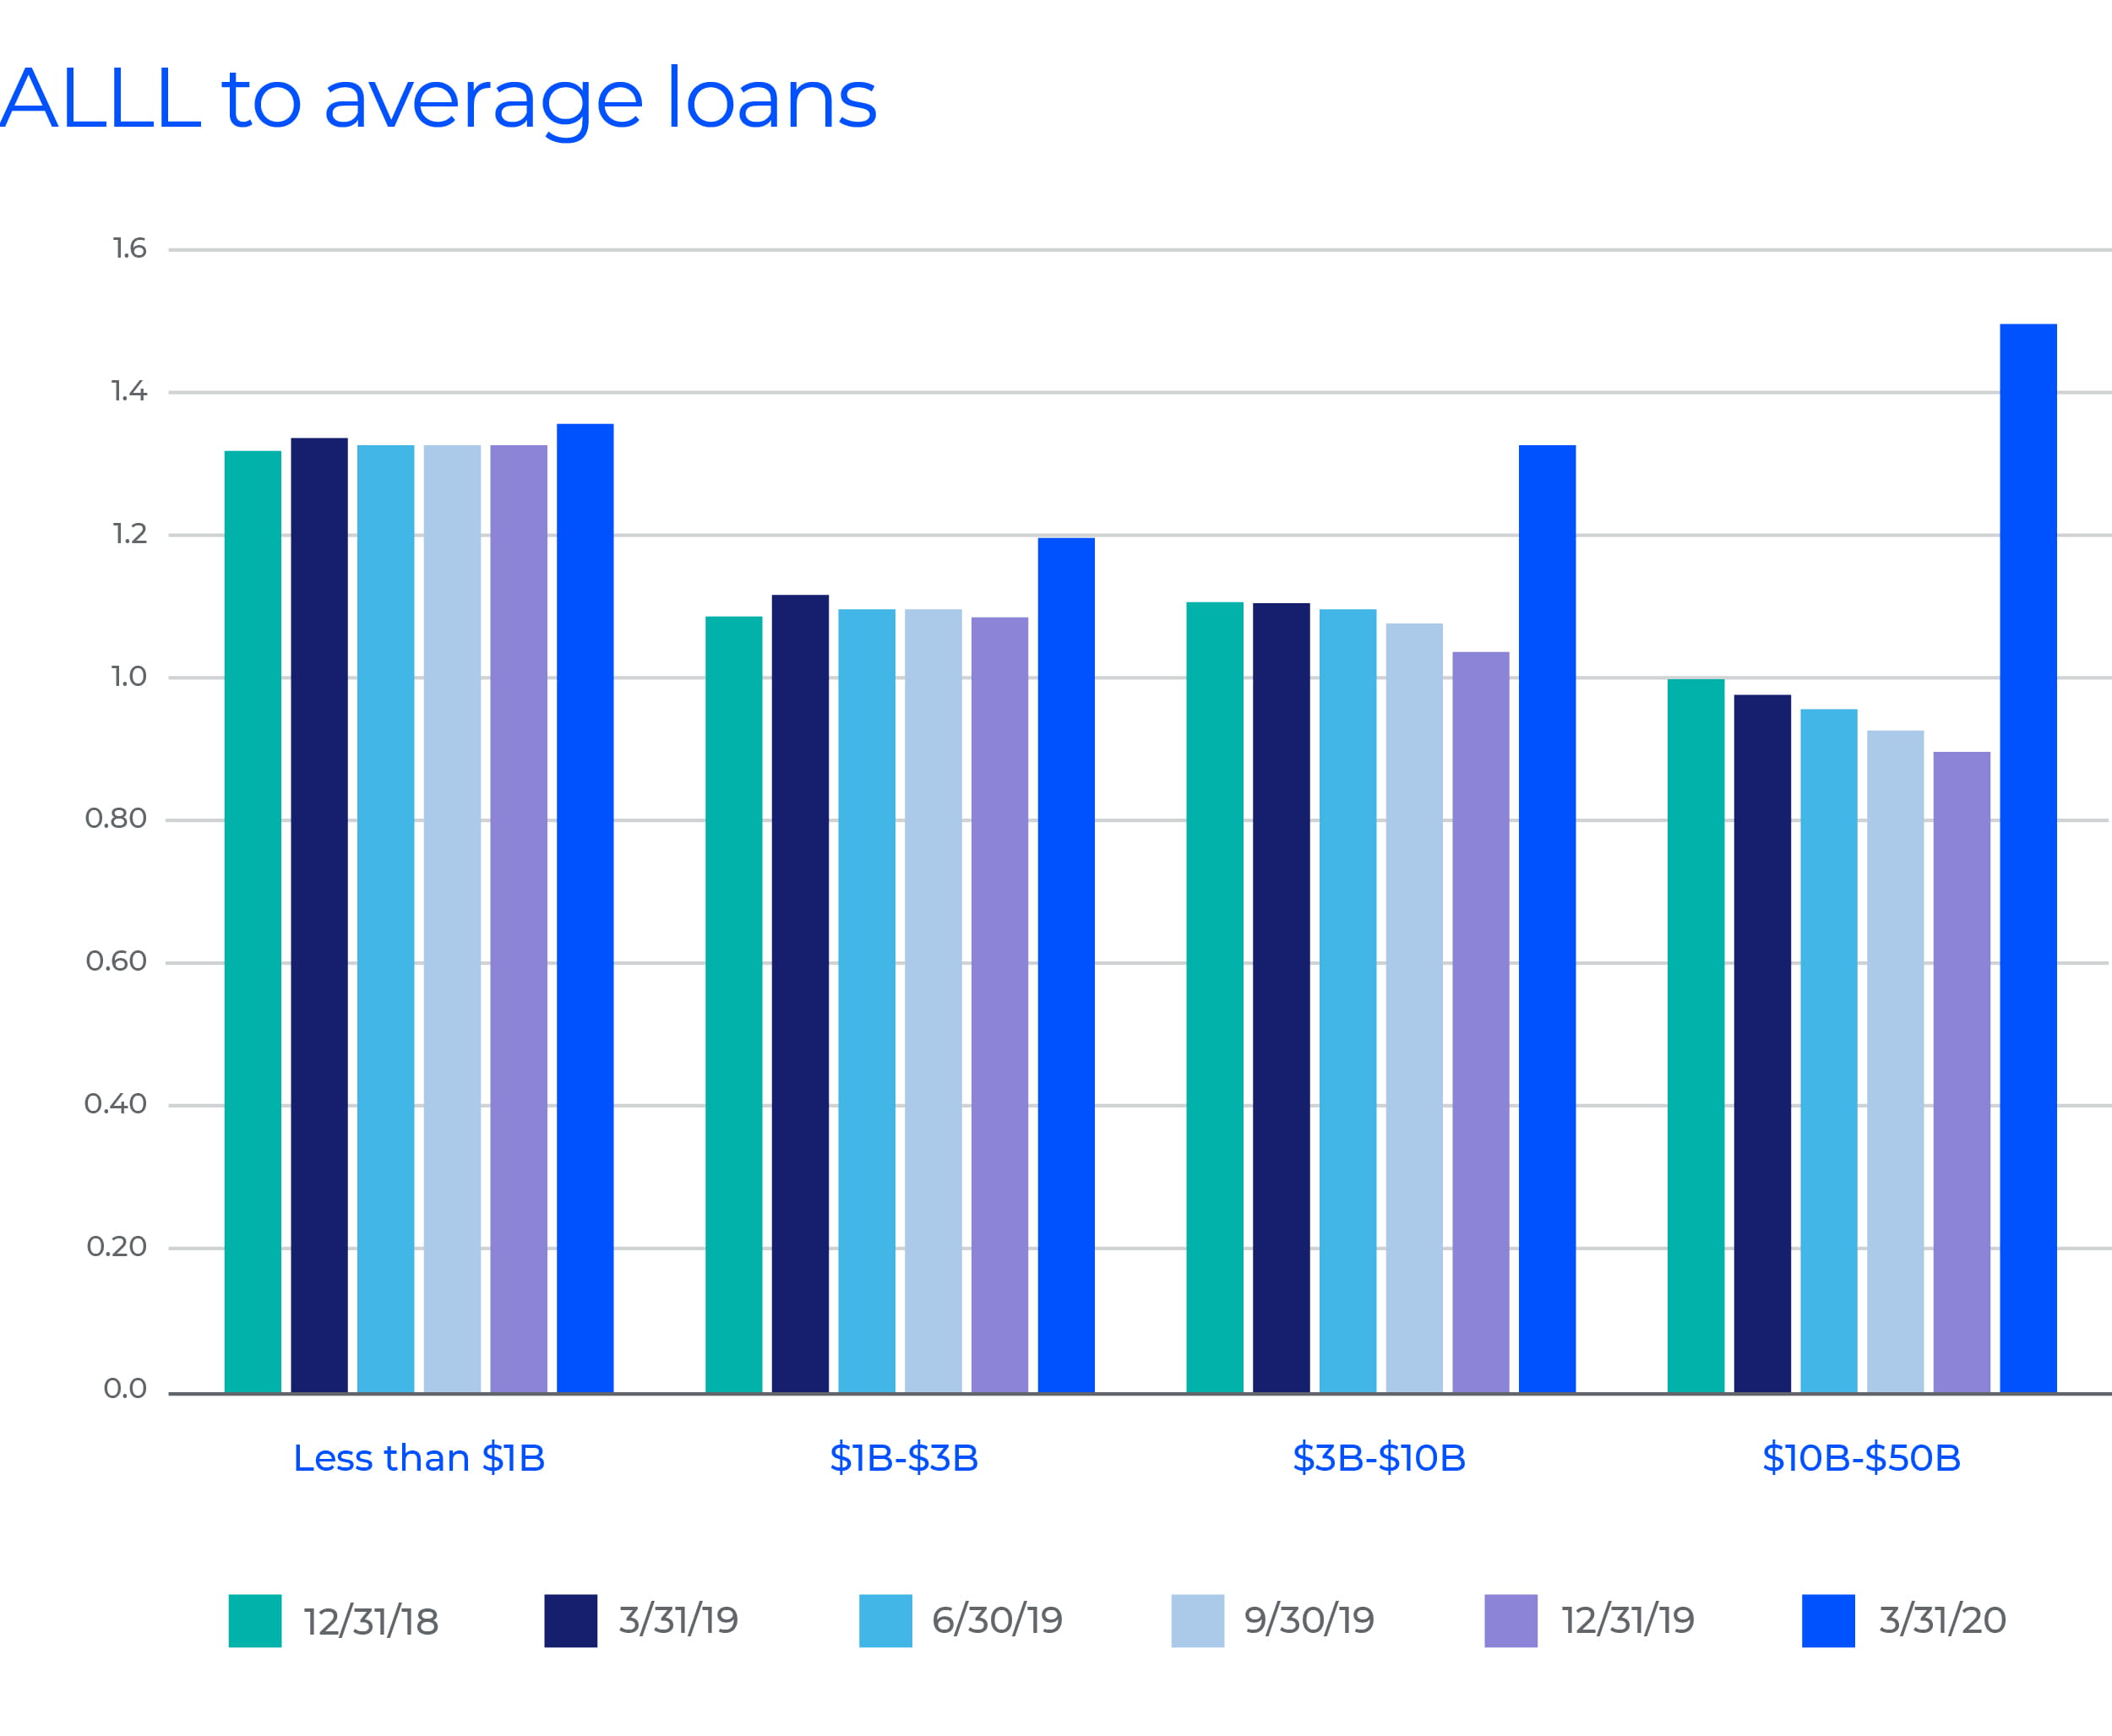 ALLL to average to average loans graph